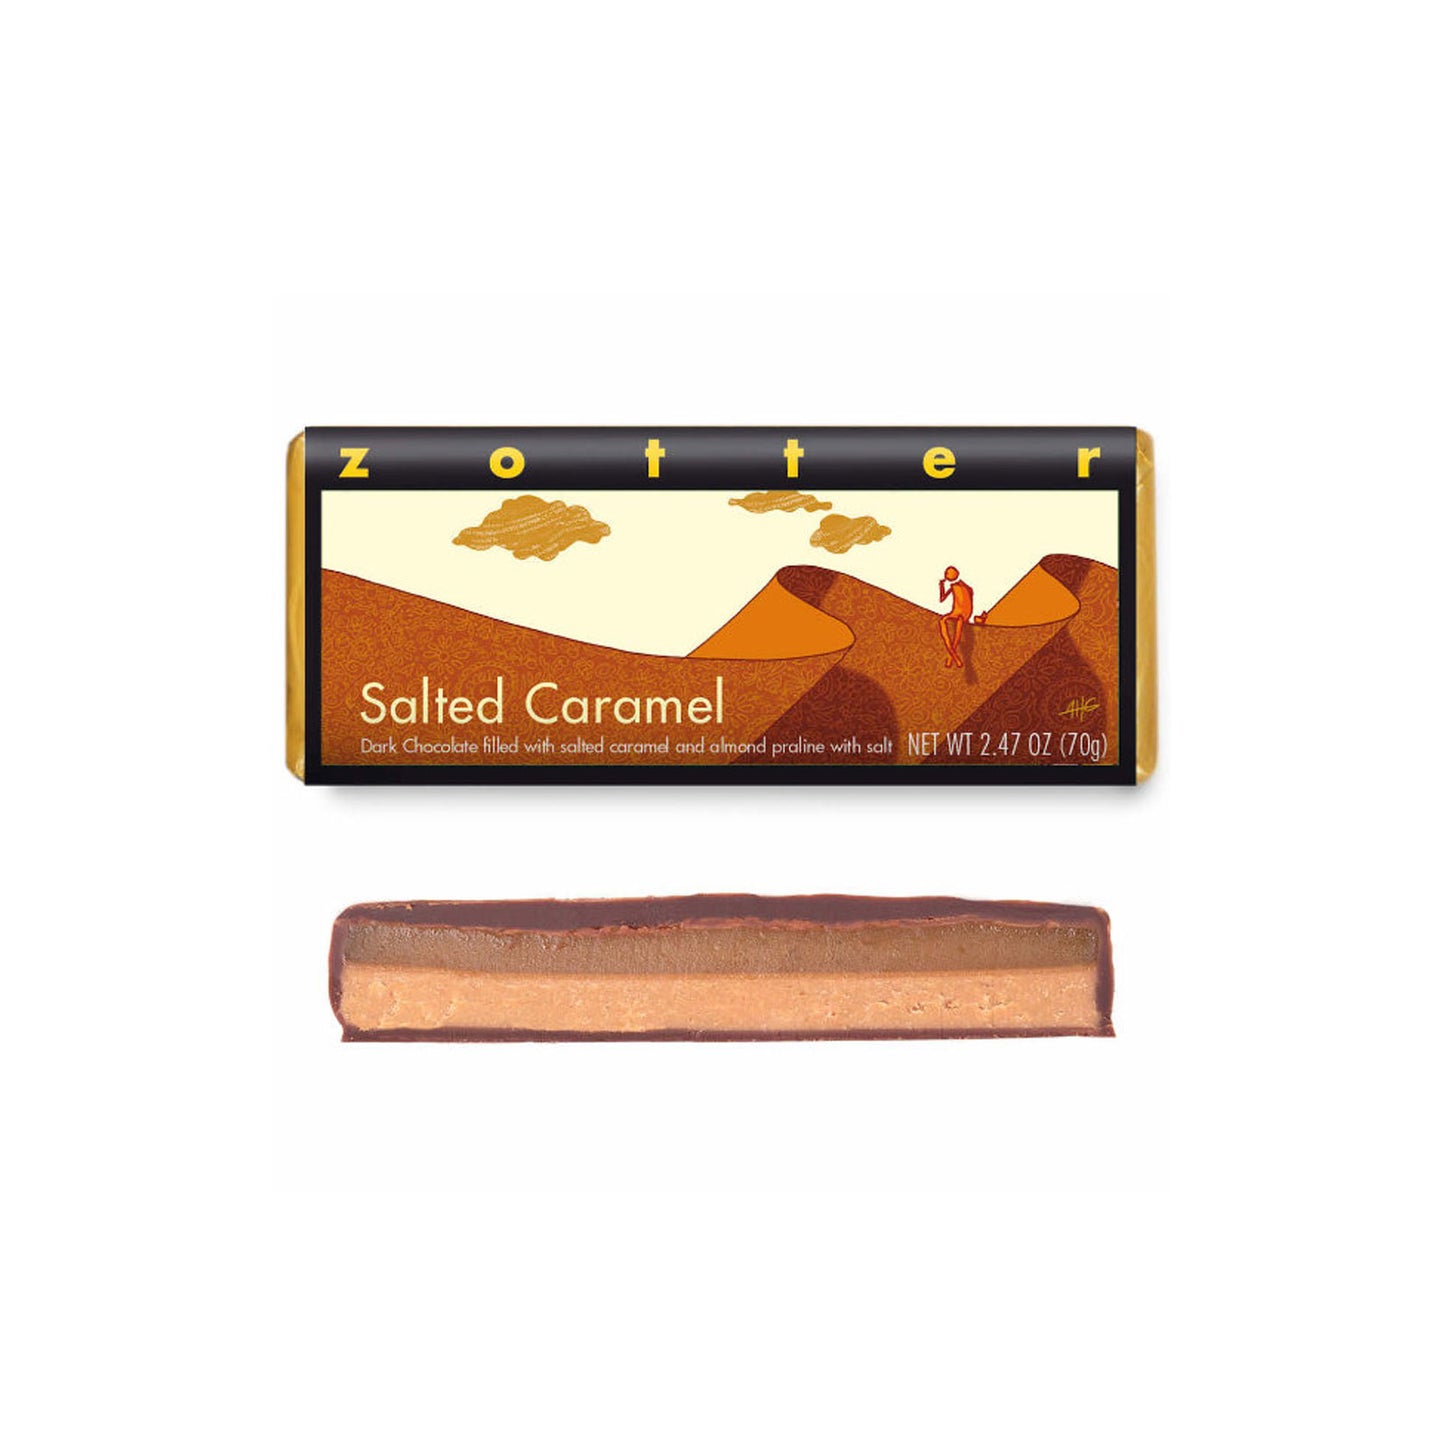 Salted Caramel | Hand-Scooped Chocolate Bar